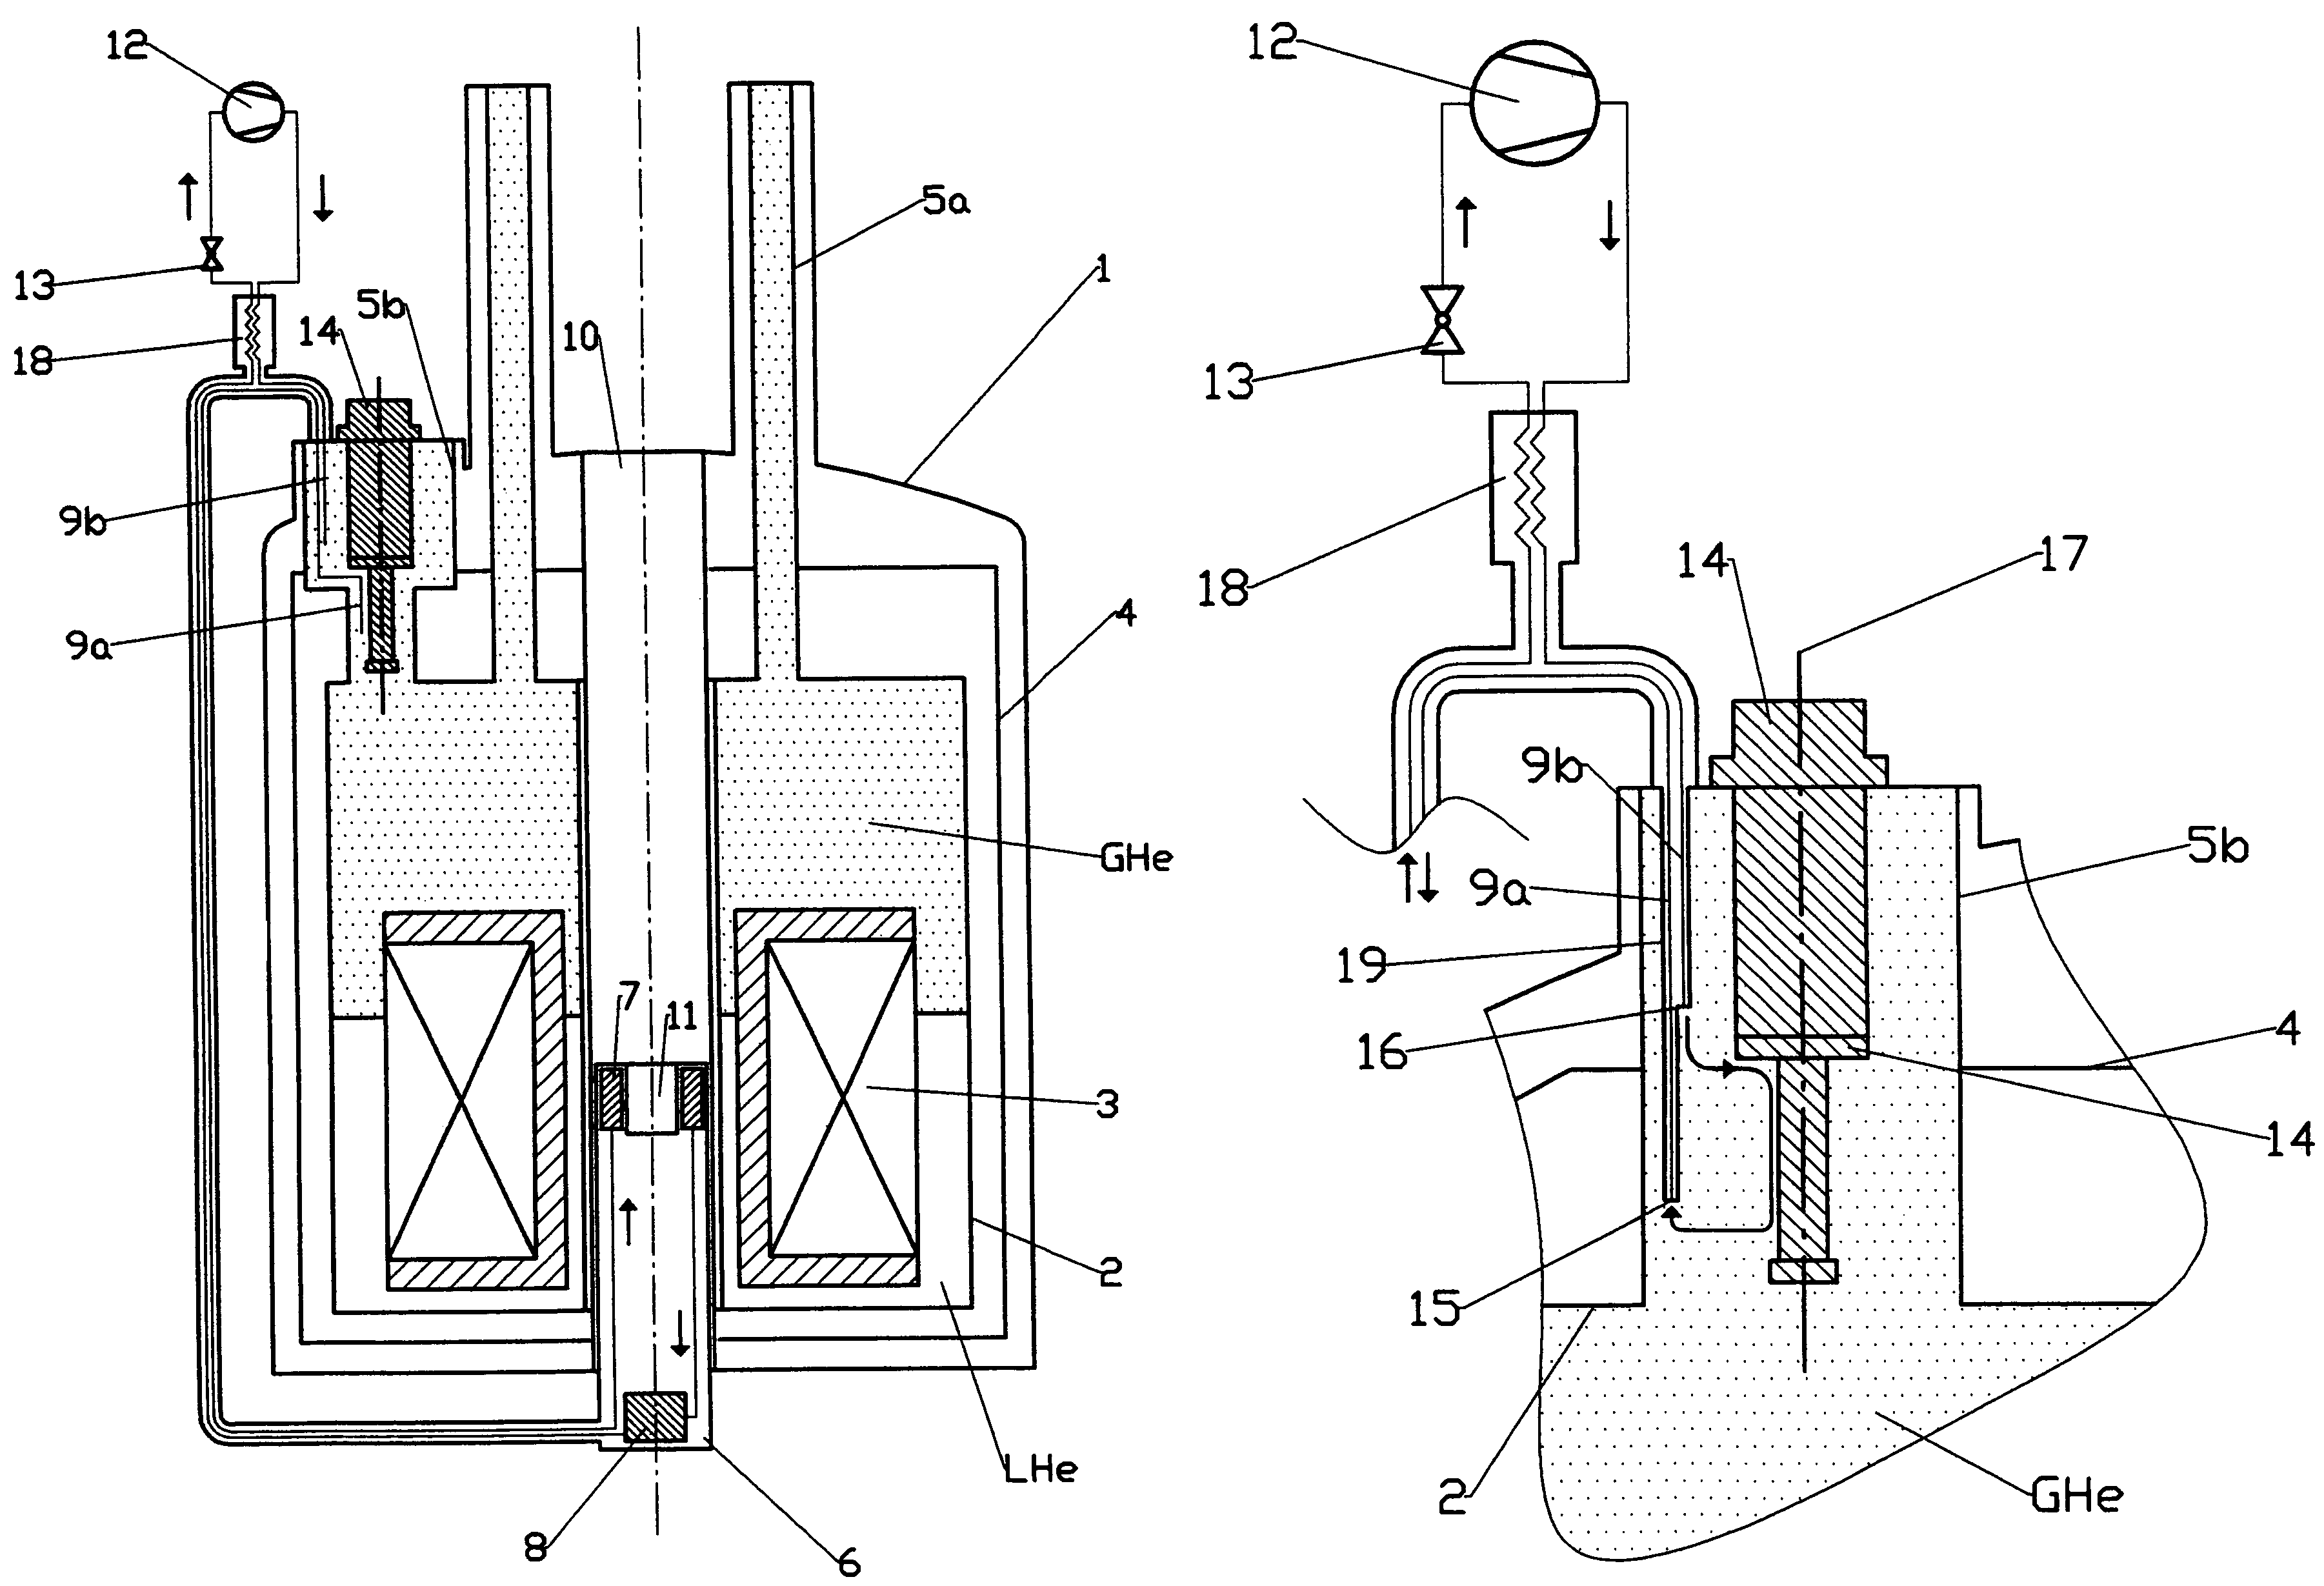 NMR spectrometer with common refrigerator for cooling an NMR probe head and cryostat